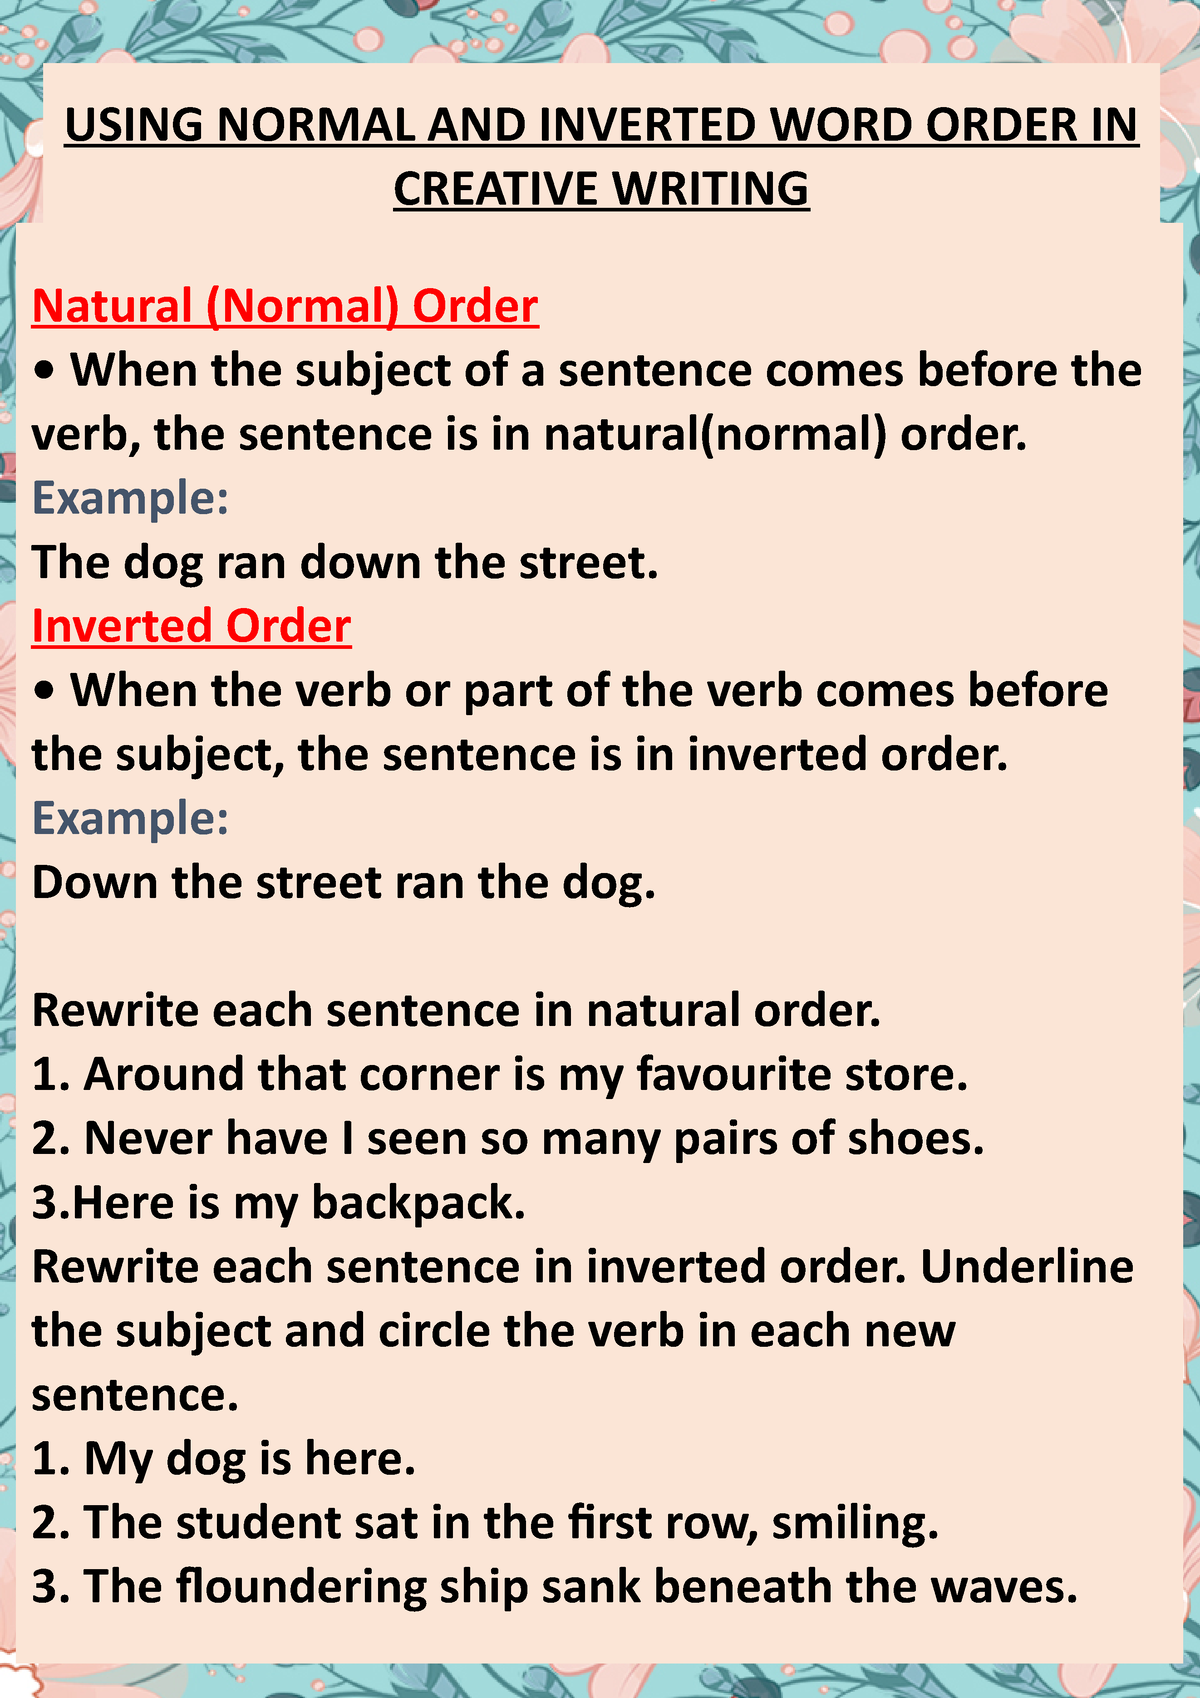 inverted-normal-word-order-grade-9-visuals-using-normal-and-inverted